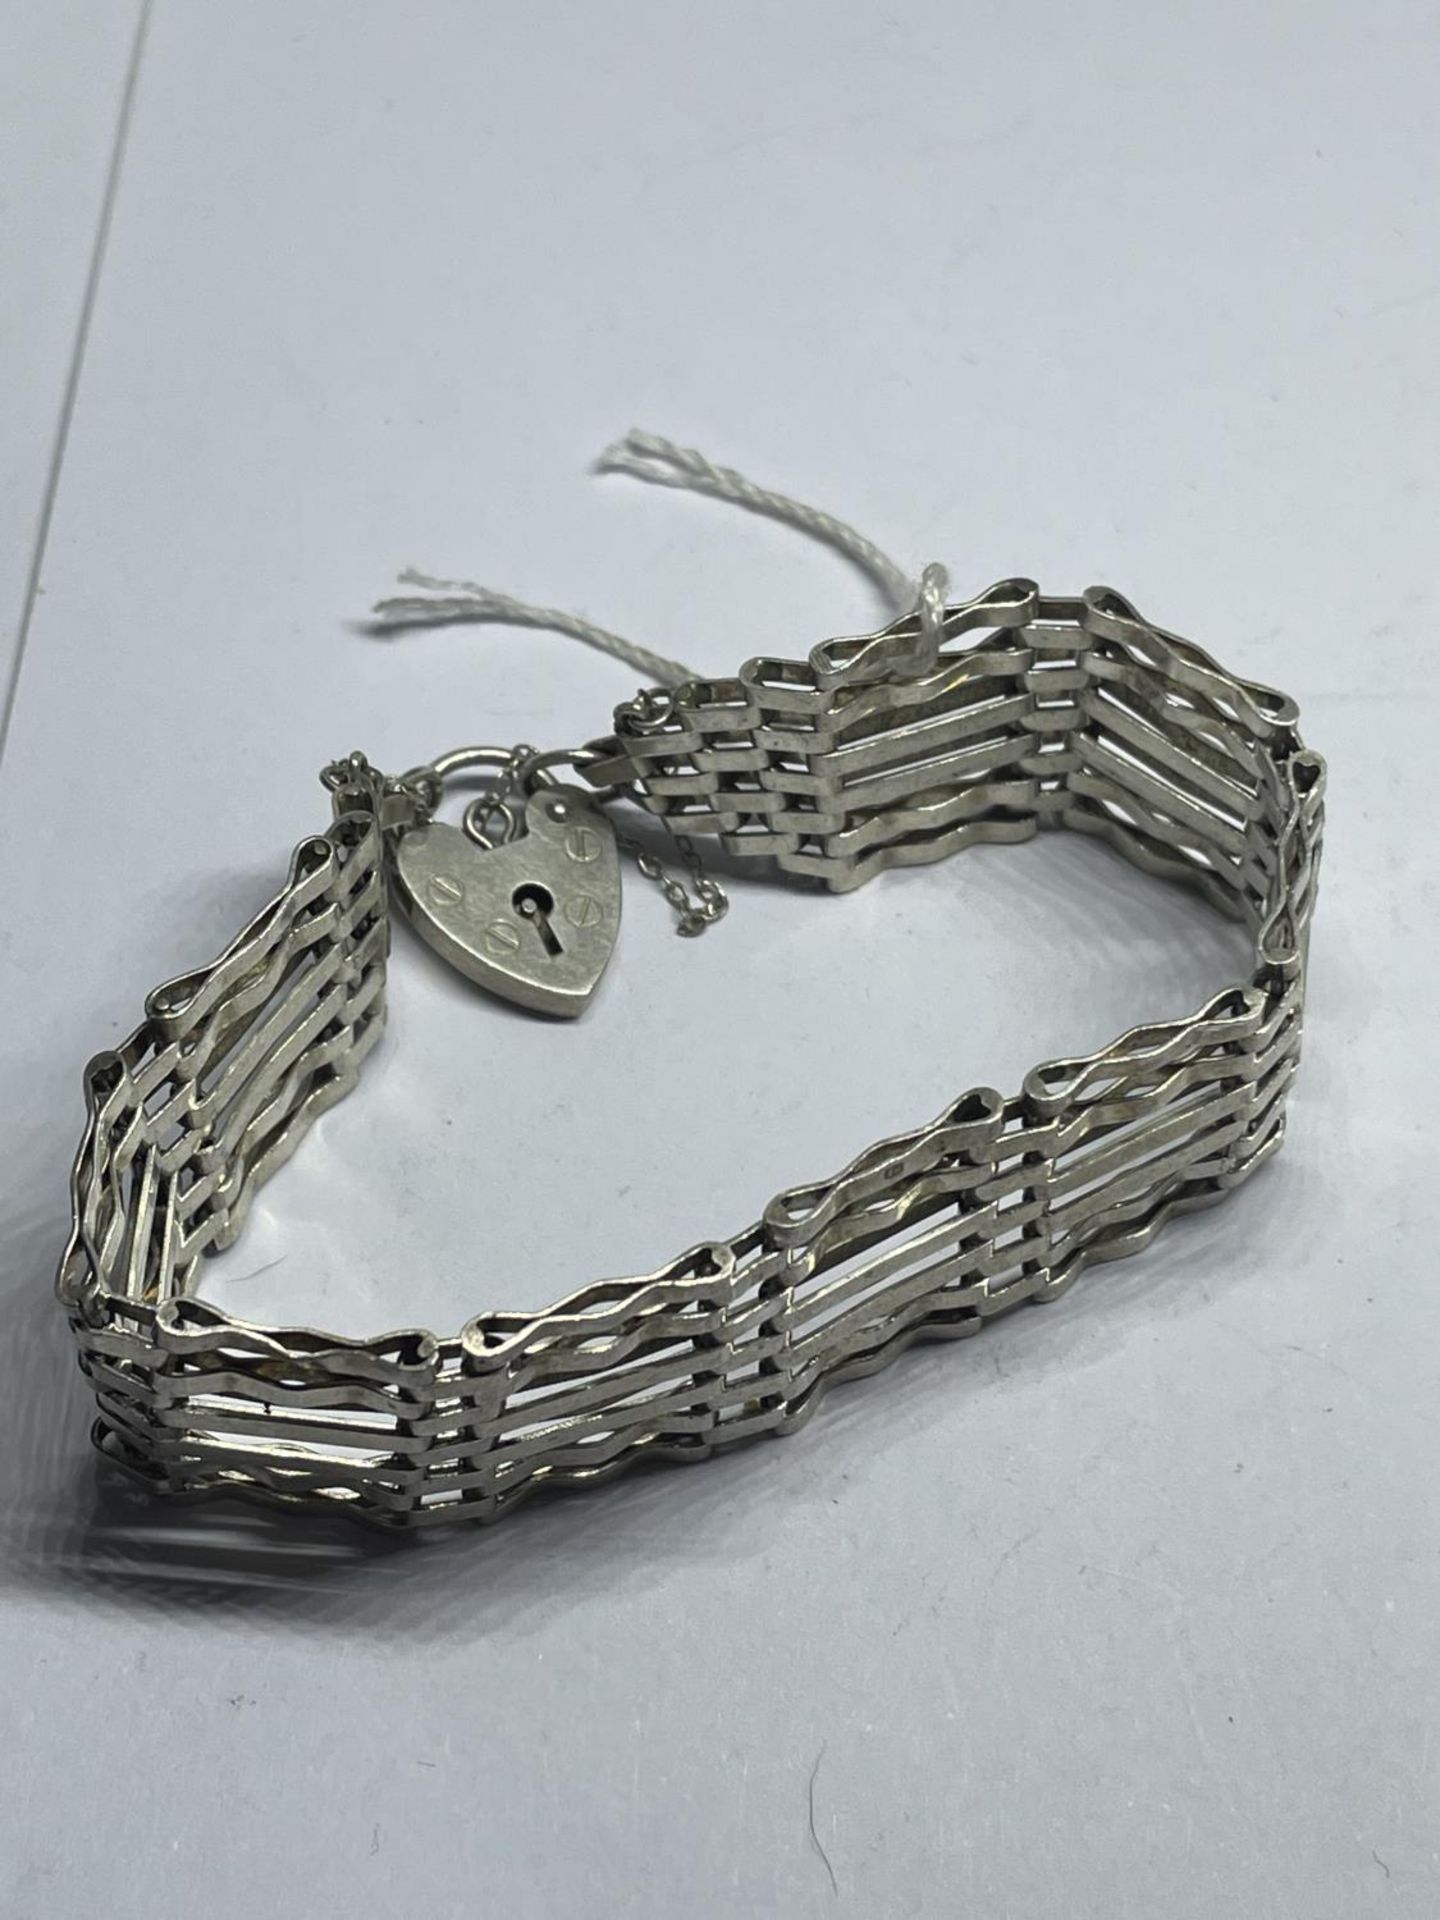 A MARKED SILVER SIX BAR GATE BRACELET WITH HEART PADLOCK WEIGHT 20 GRAMS - Image 2 of 3